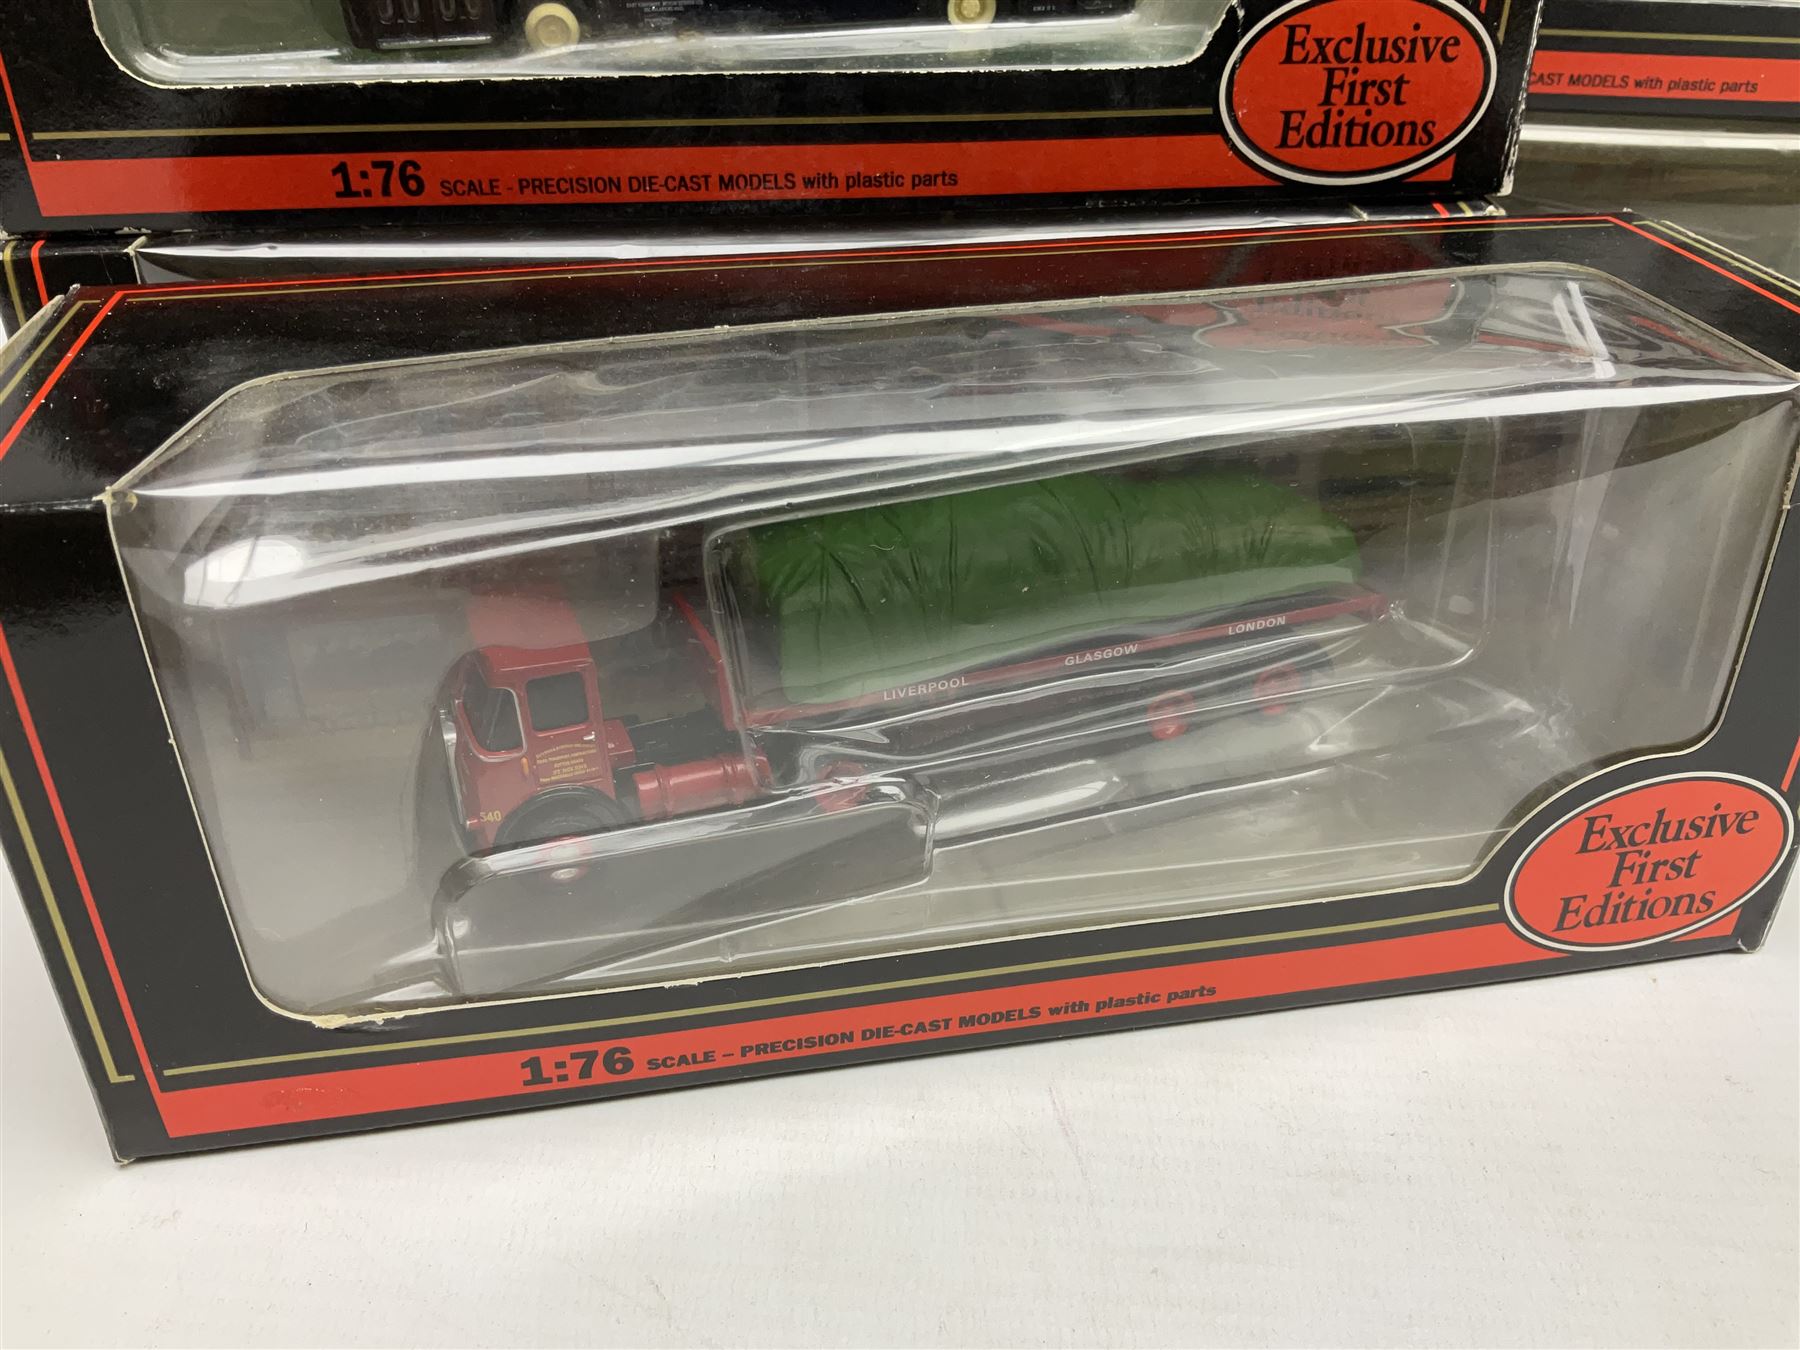 Ten Exclusive First Editions 1:76 scale die-cast models - Image 4 of 7